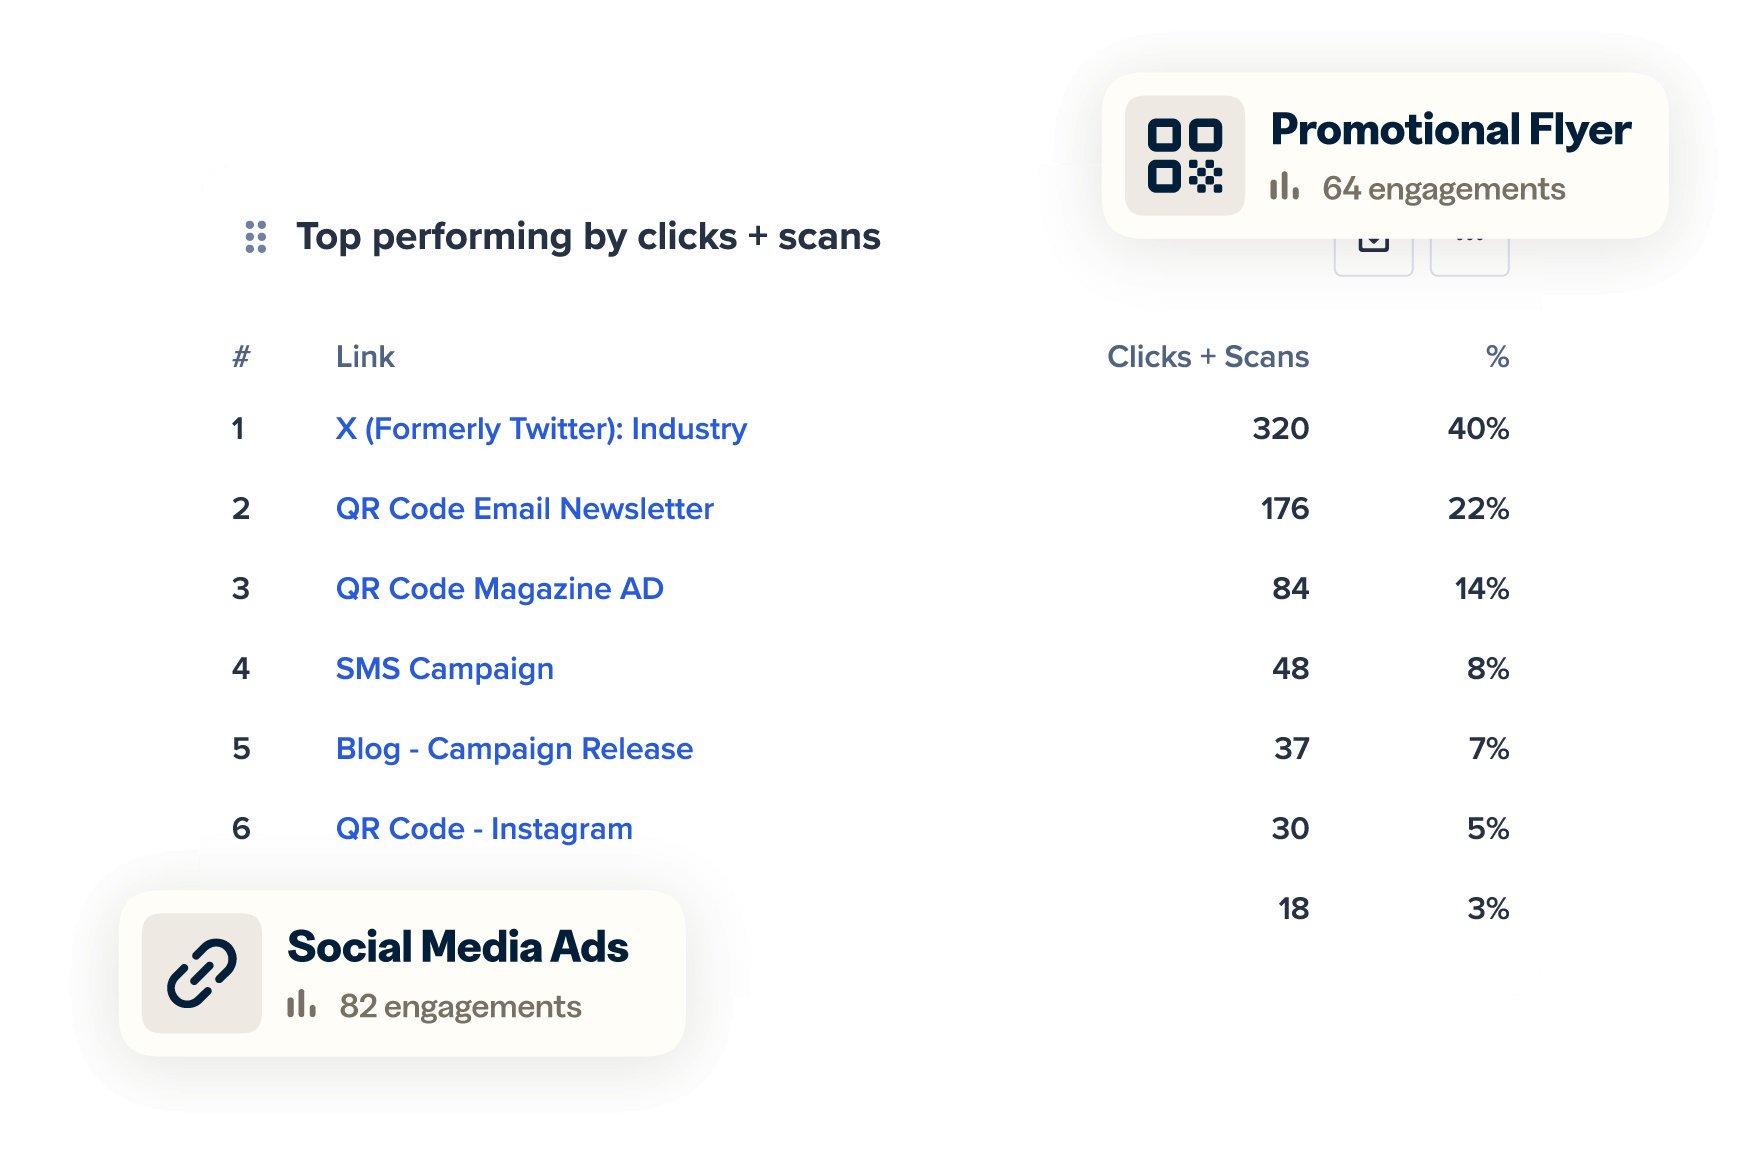  Top performing by clicks + scans from and engagement info from a promo flyer and social media ads